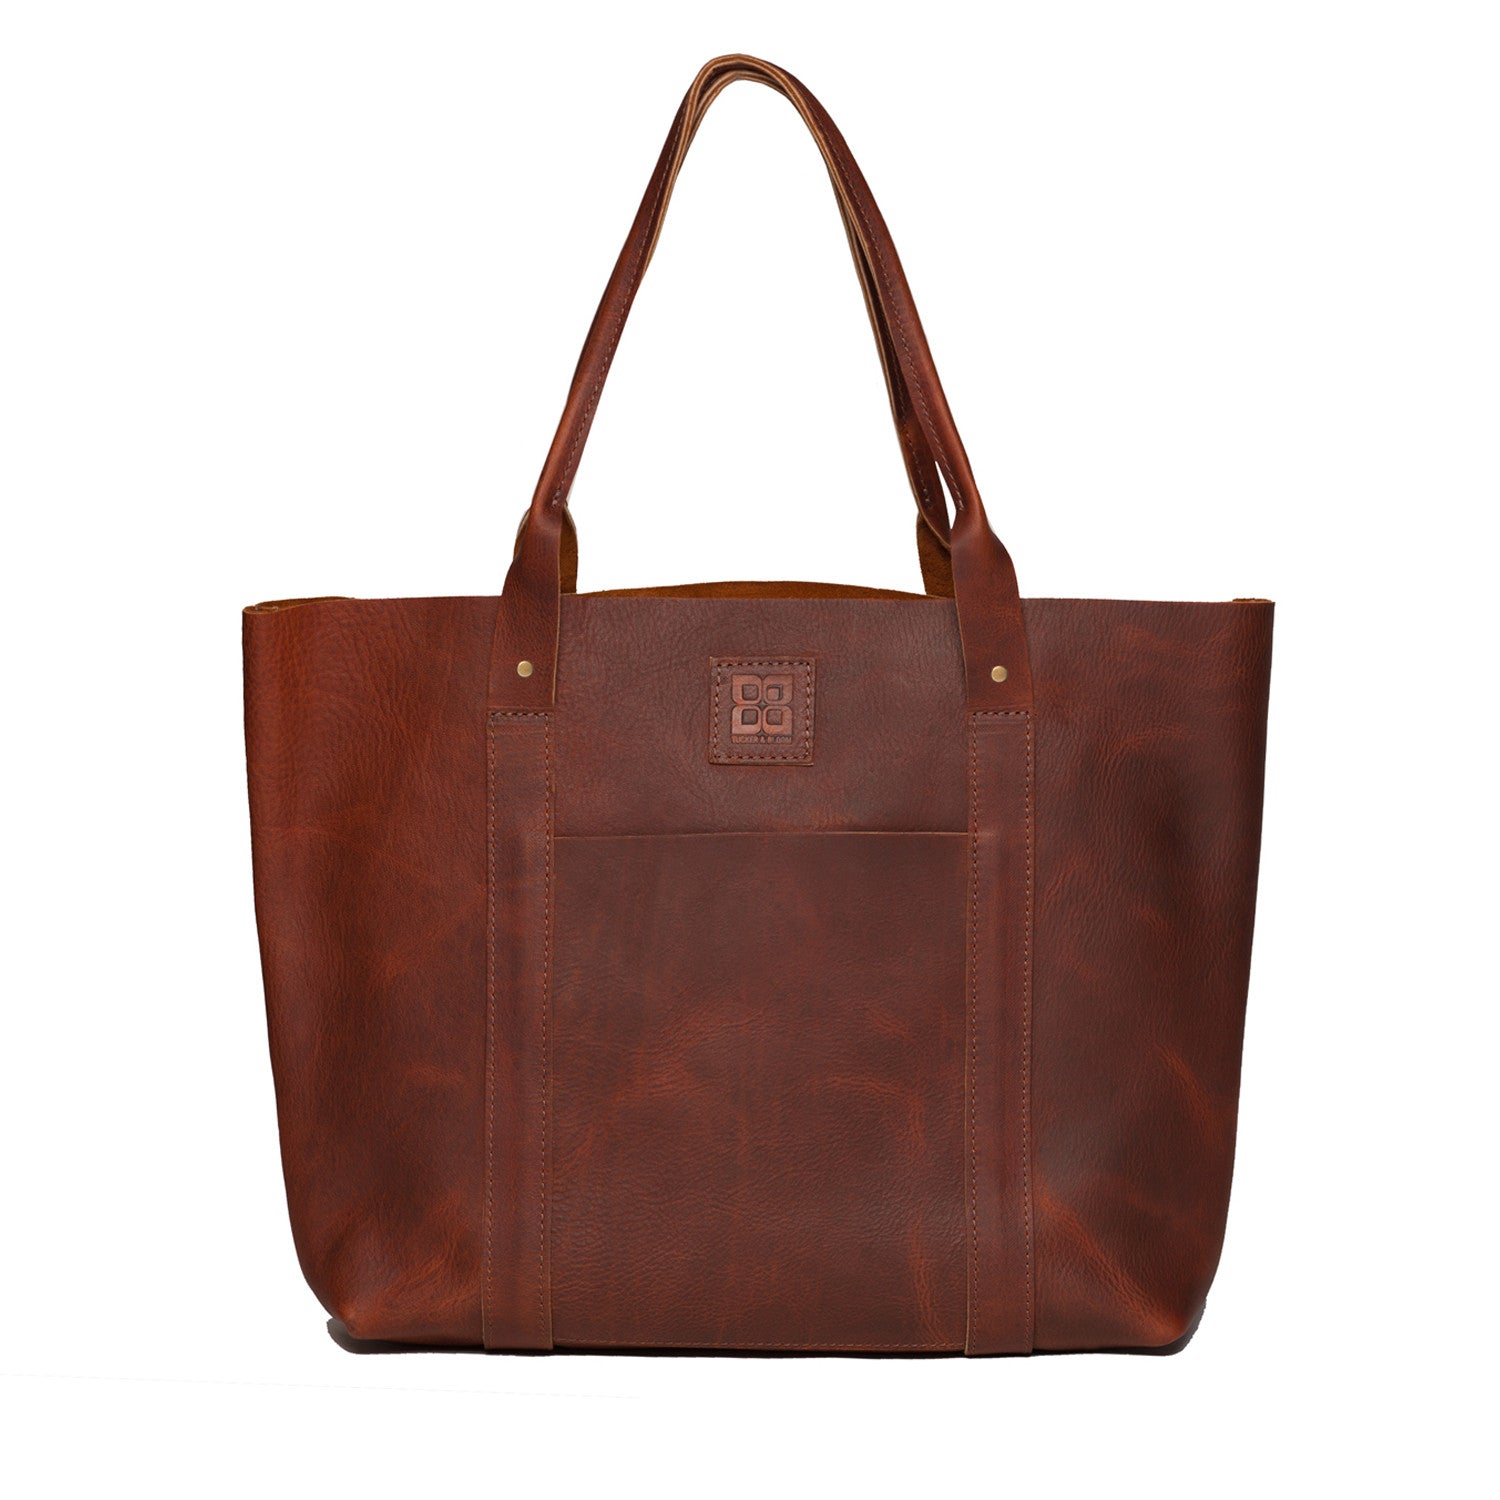 Introducing the Greenwood Bison Leather Tote Bag!